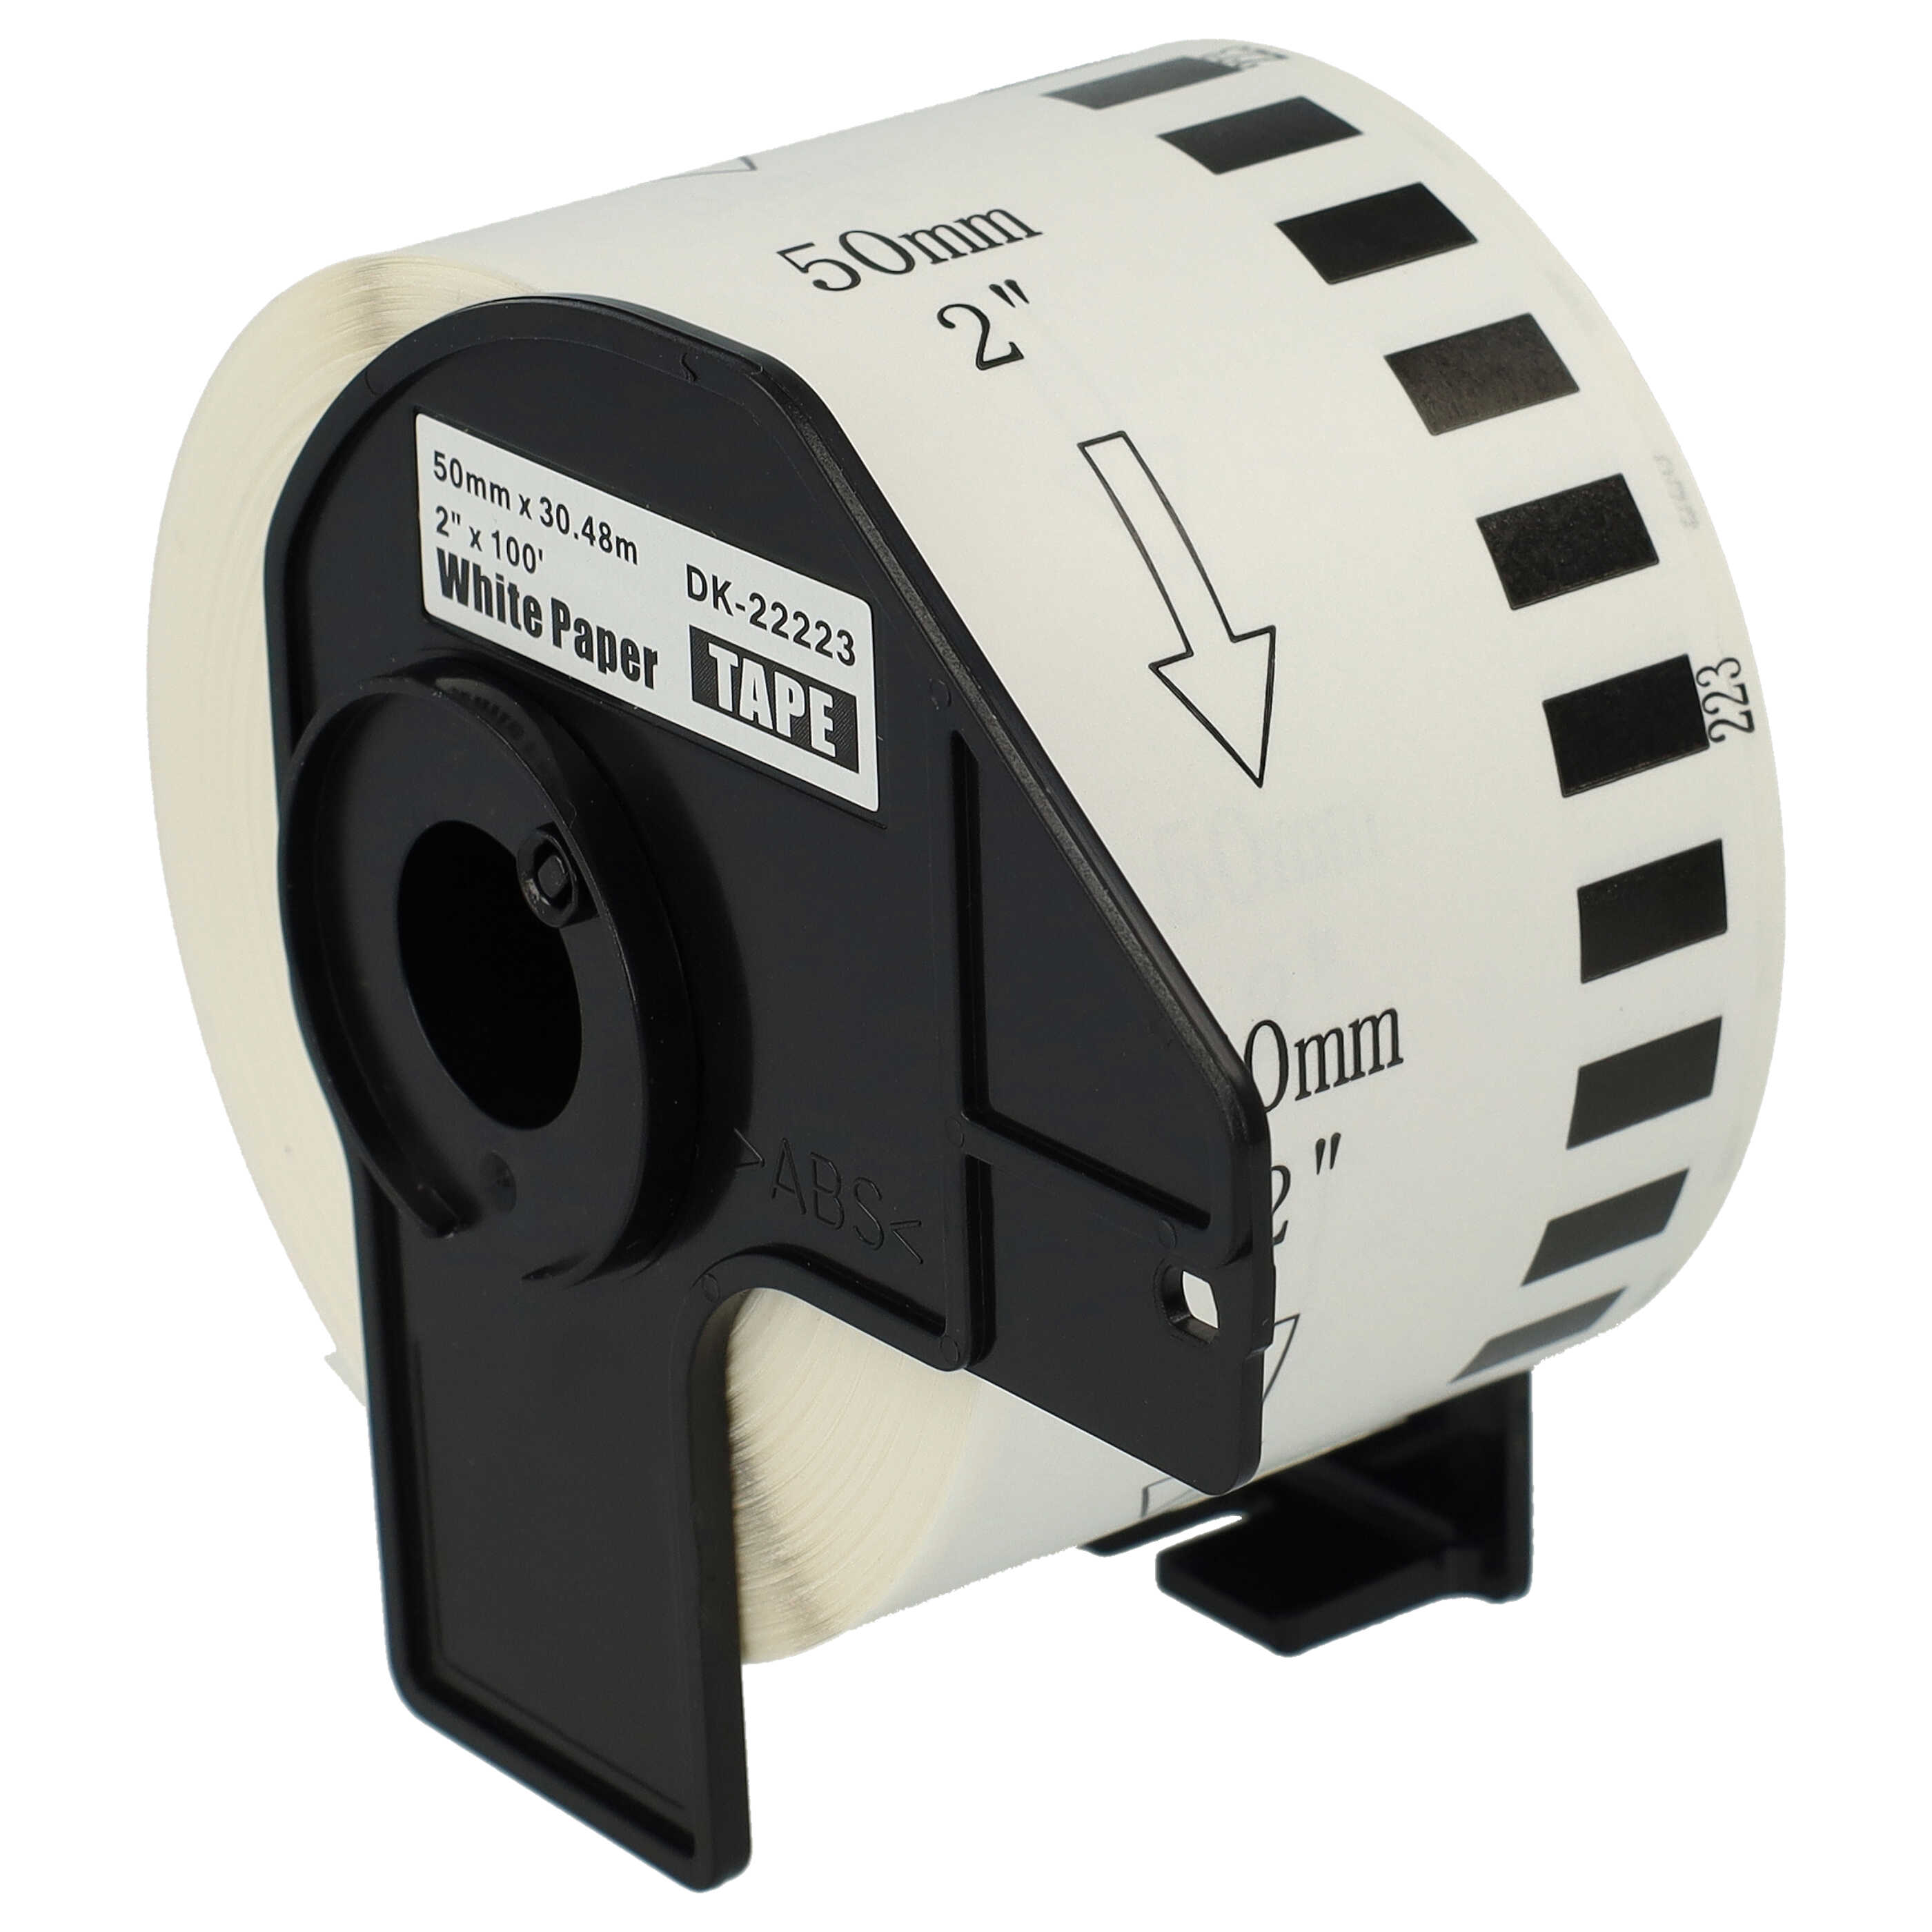 Labels replaces Brother DK-22223 for Labeller - Premium 50 mm x 30.48m + Holder